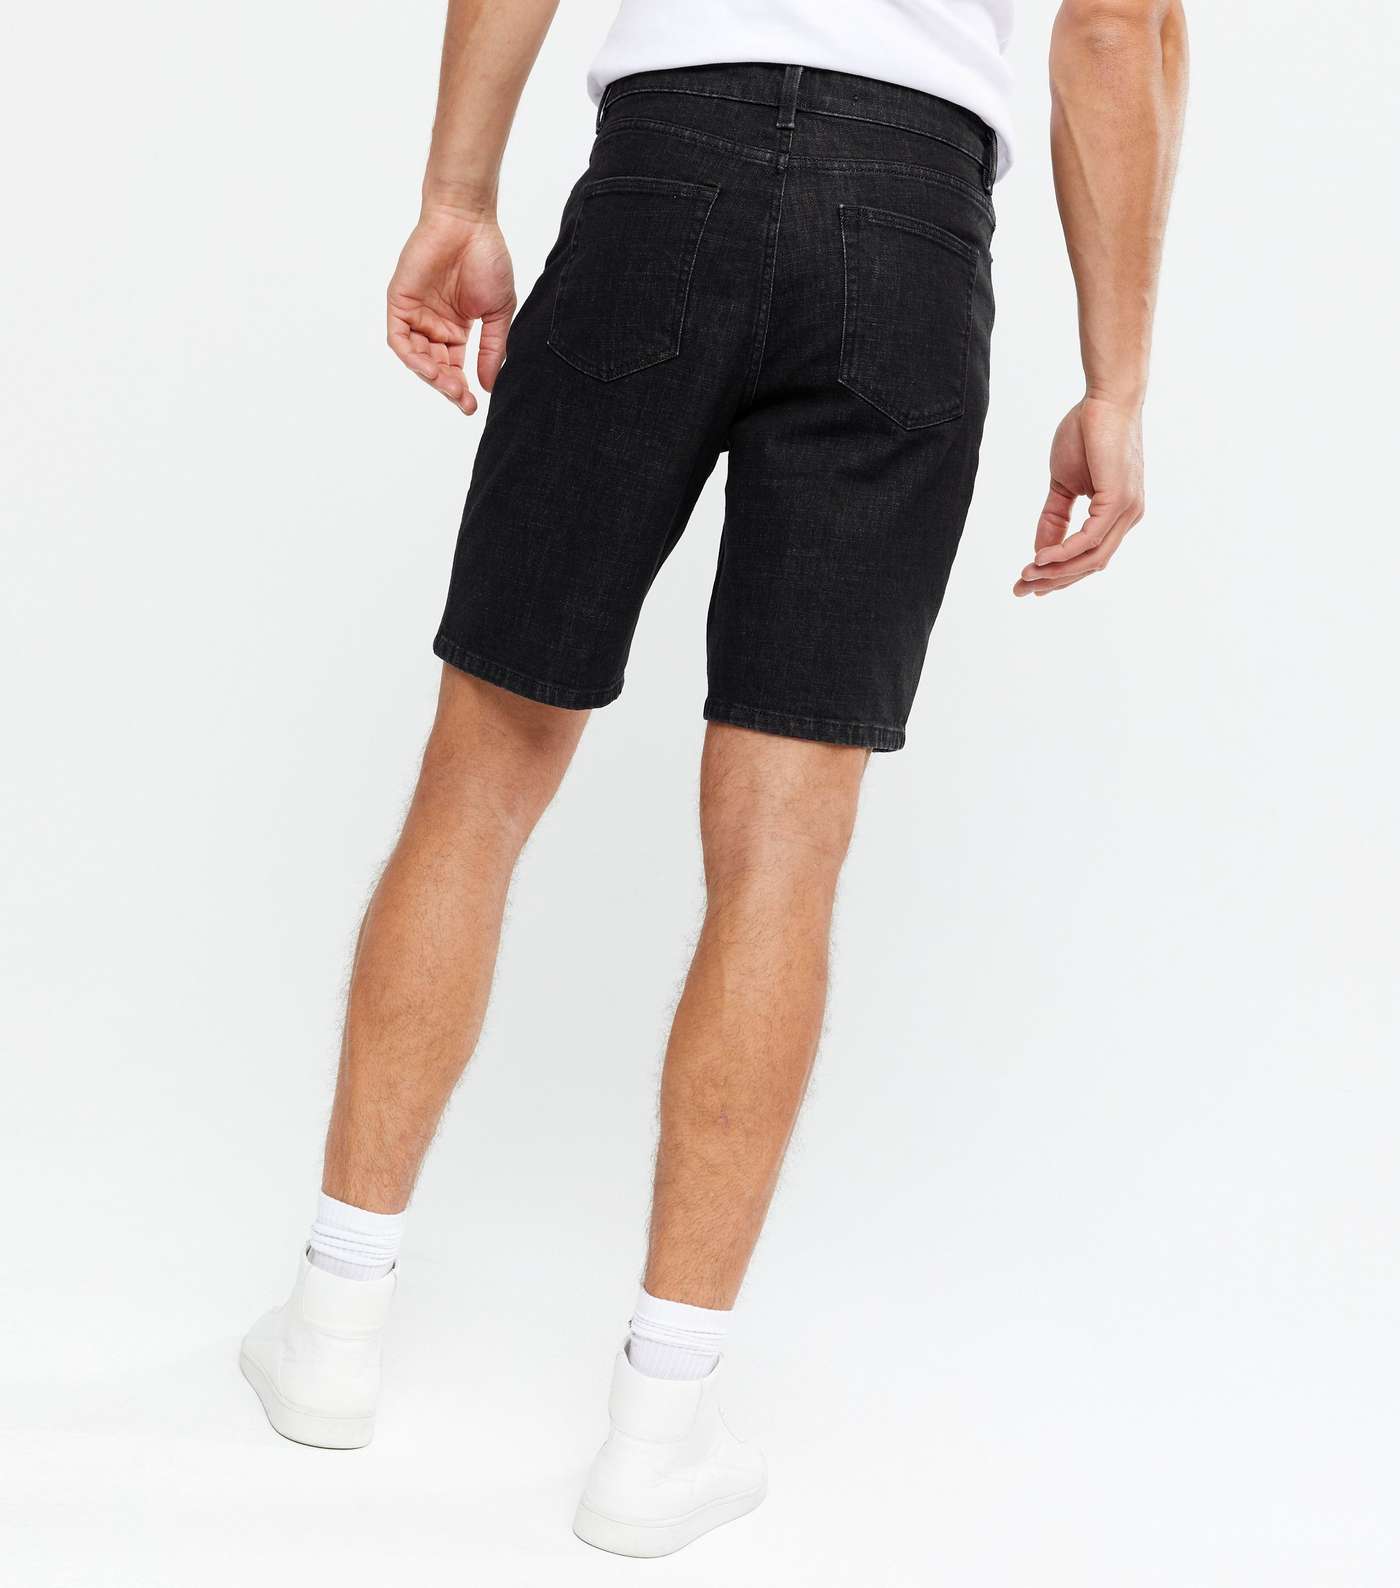 Black Denim Relaxed Fit Shorts Image 4